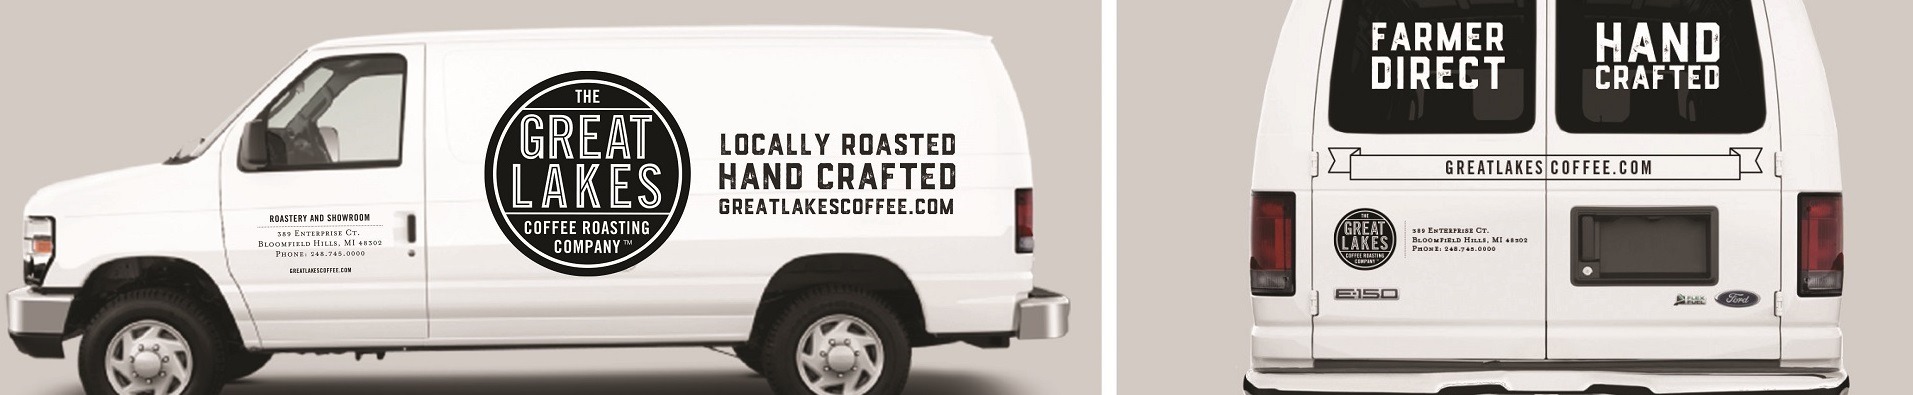 Great Lakes Roasting Company Truck Lettering